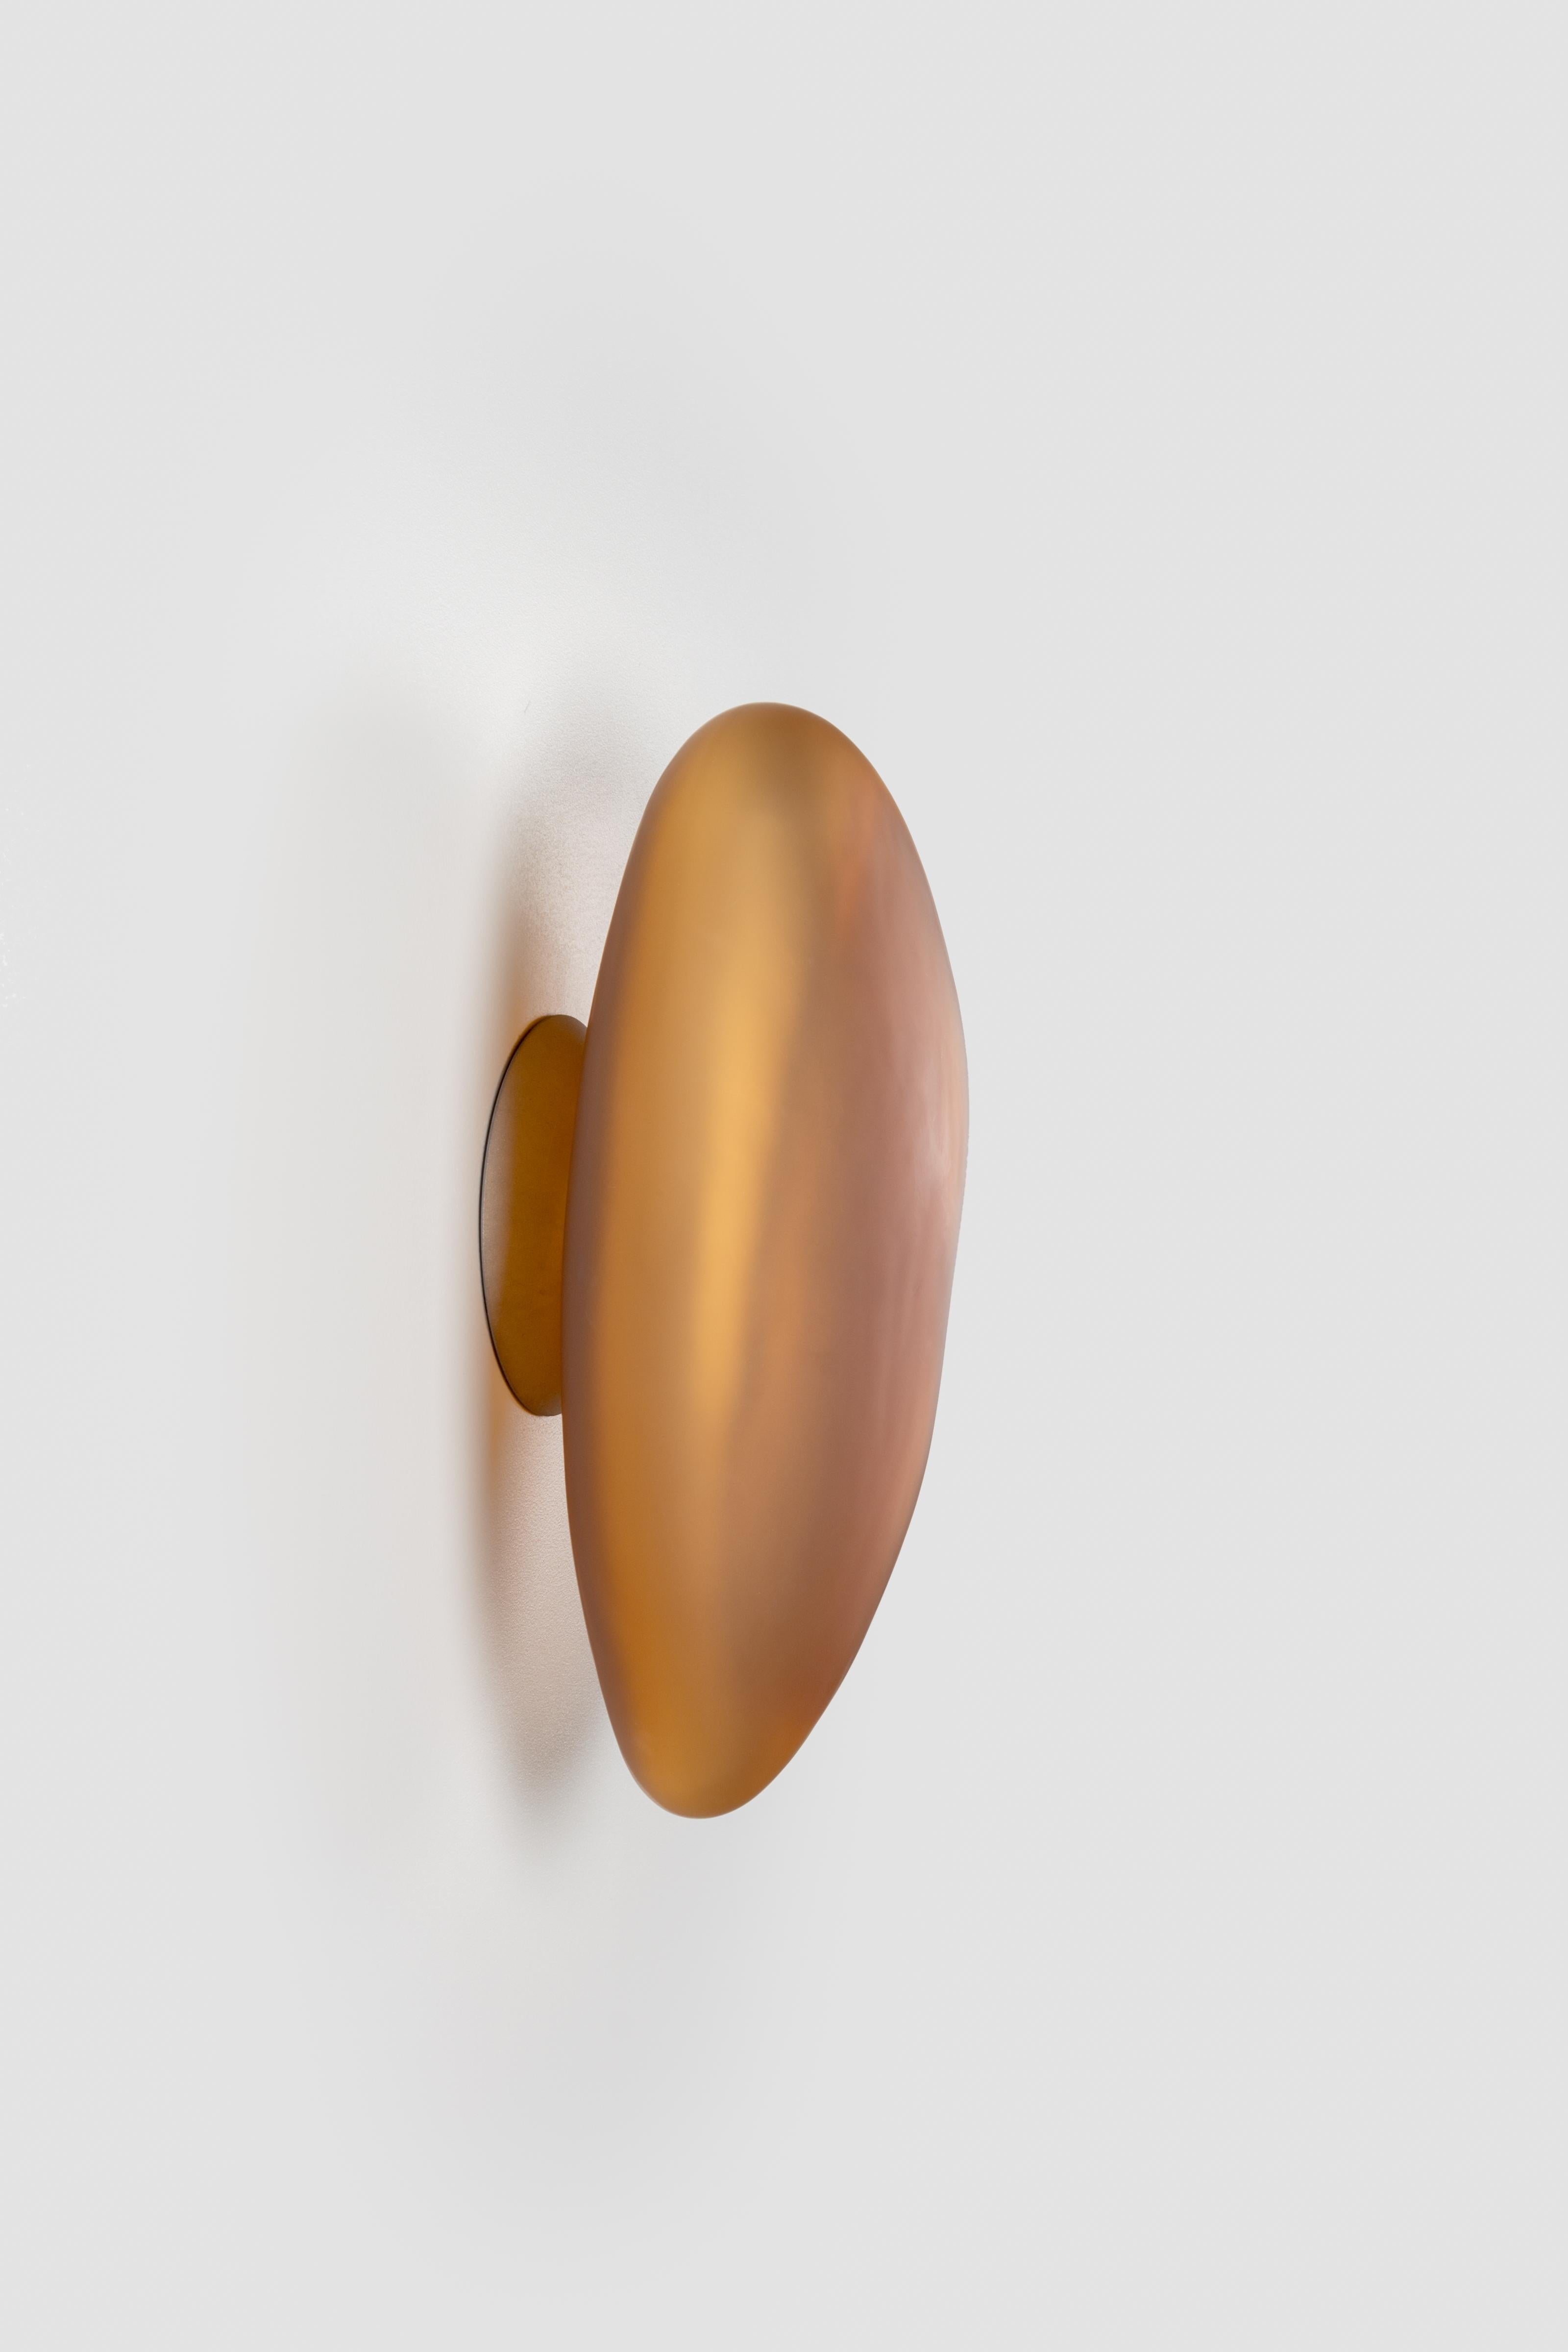 Contemporary Wall Lamp 'Pebble' by Andlight, Shape B, Citrine In New Condition For Sale In Paris, FR